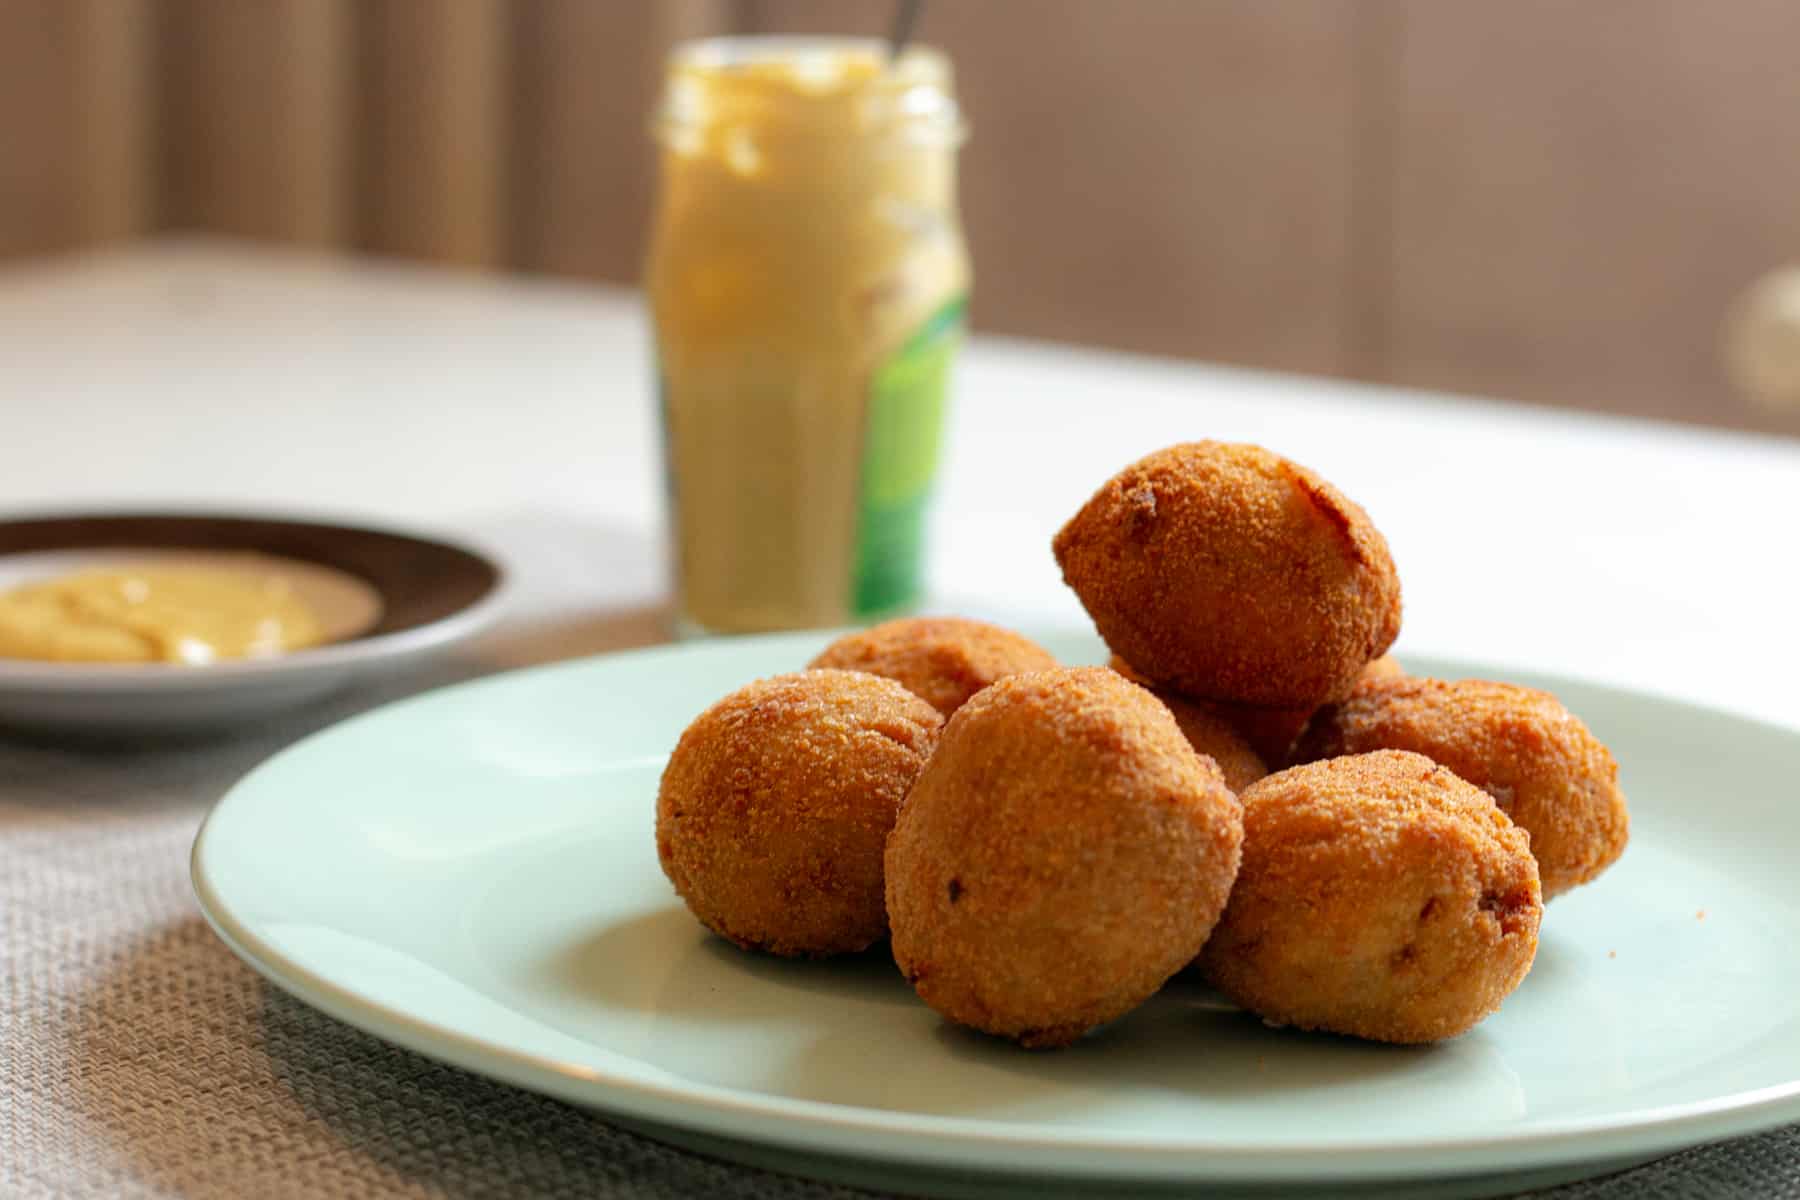 Deep fried round snacks on a plate with a jar of mustard in the background.